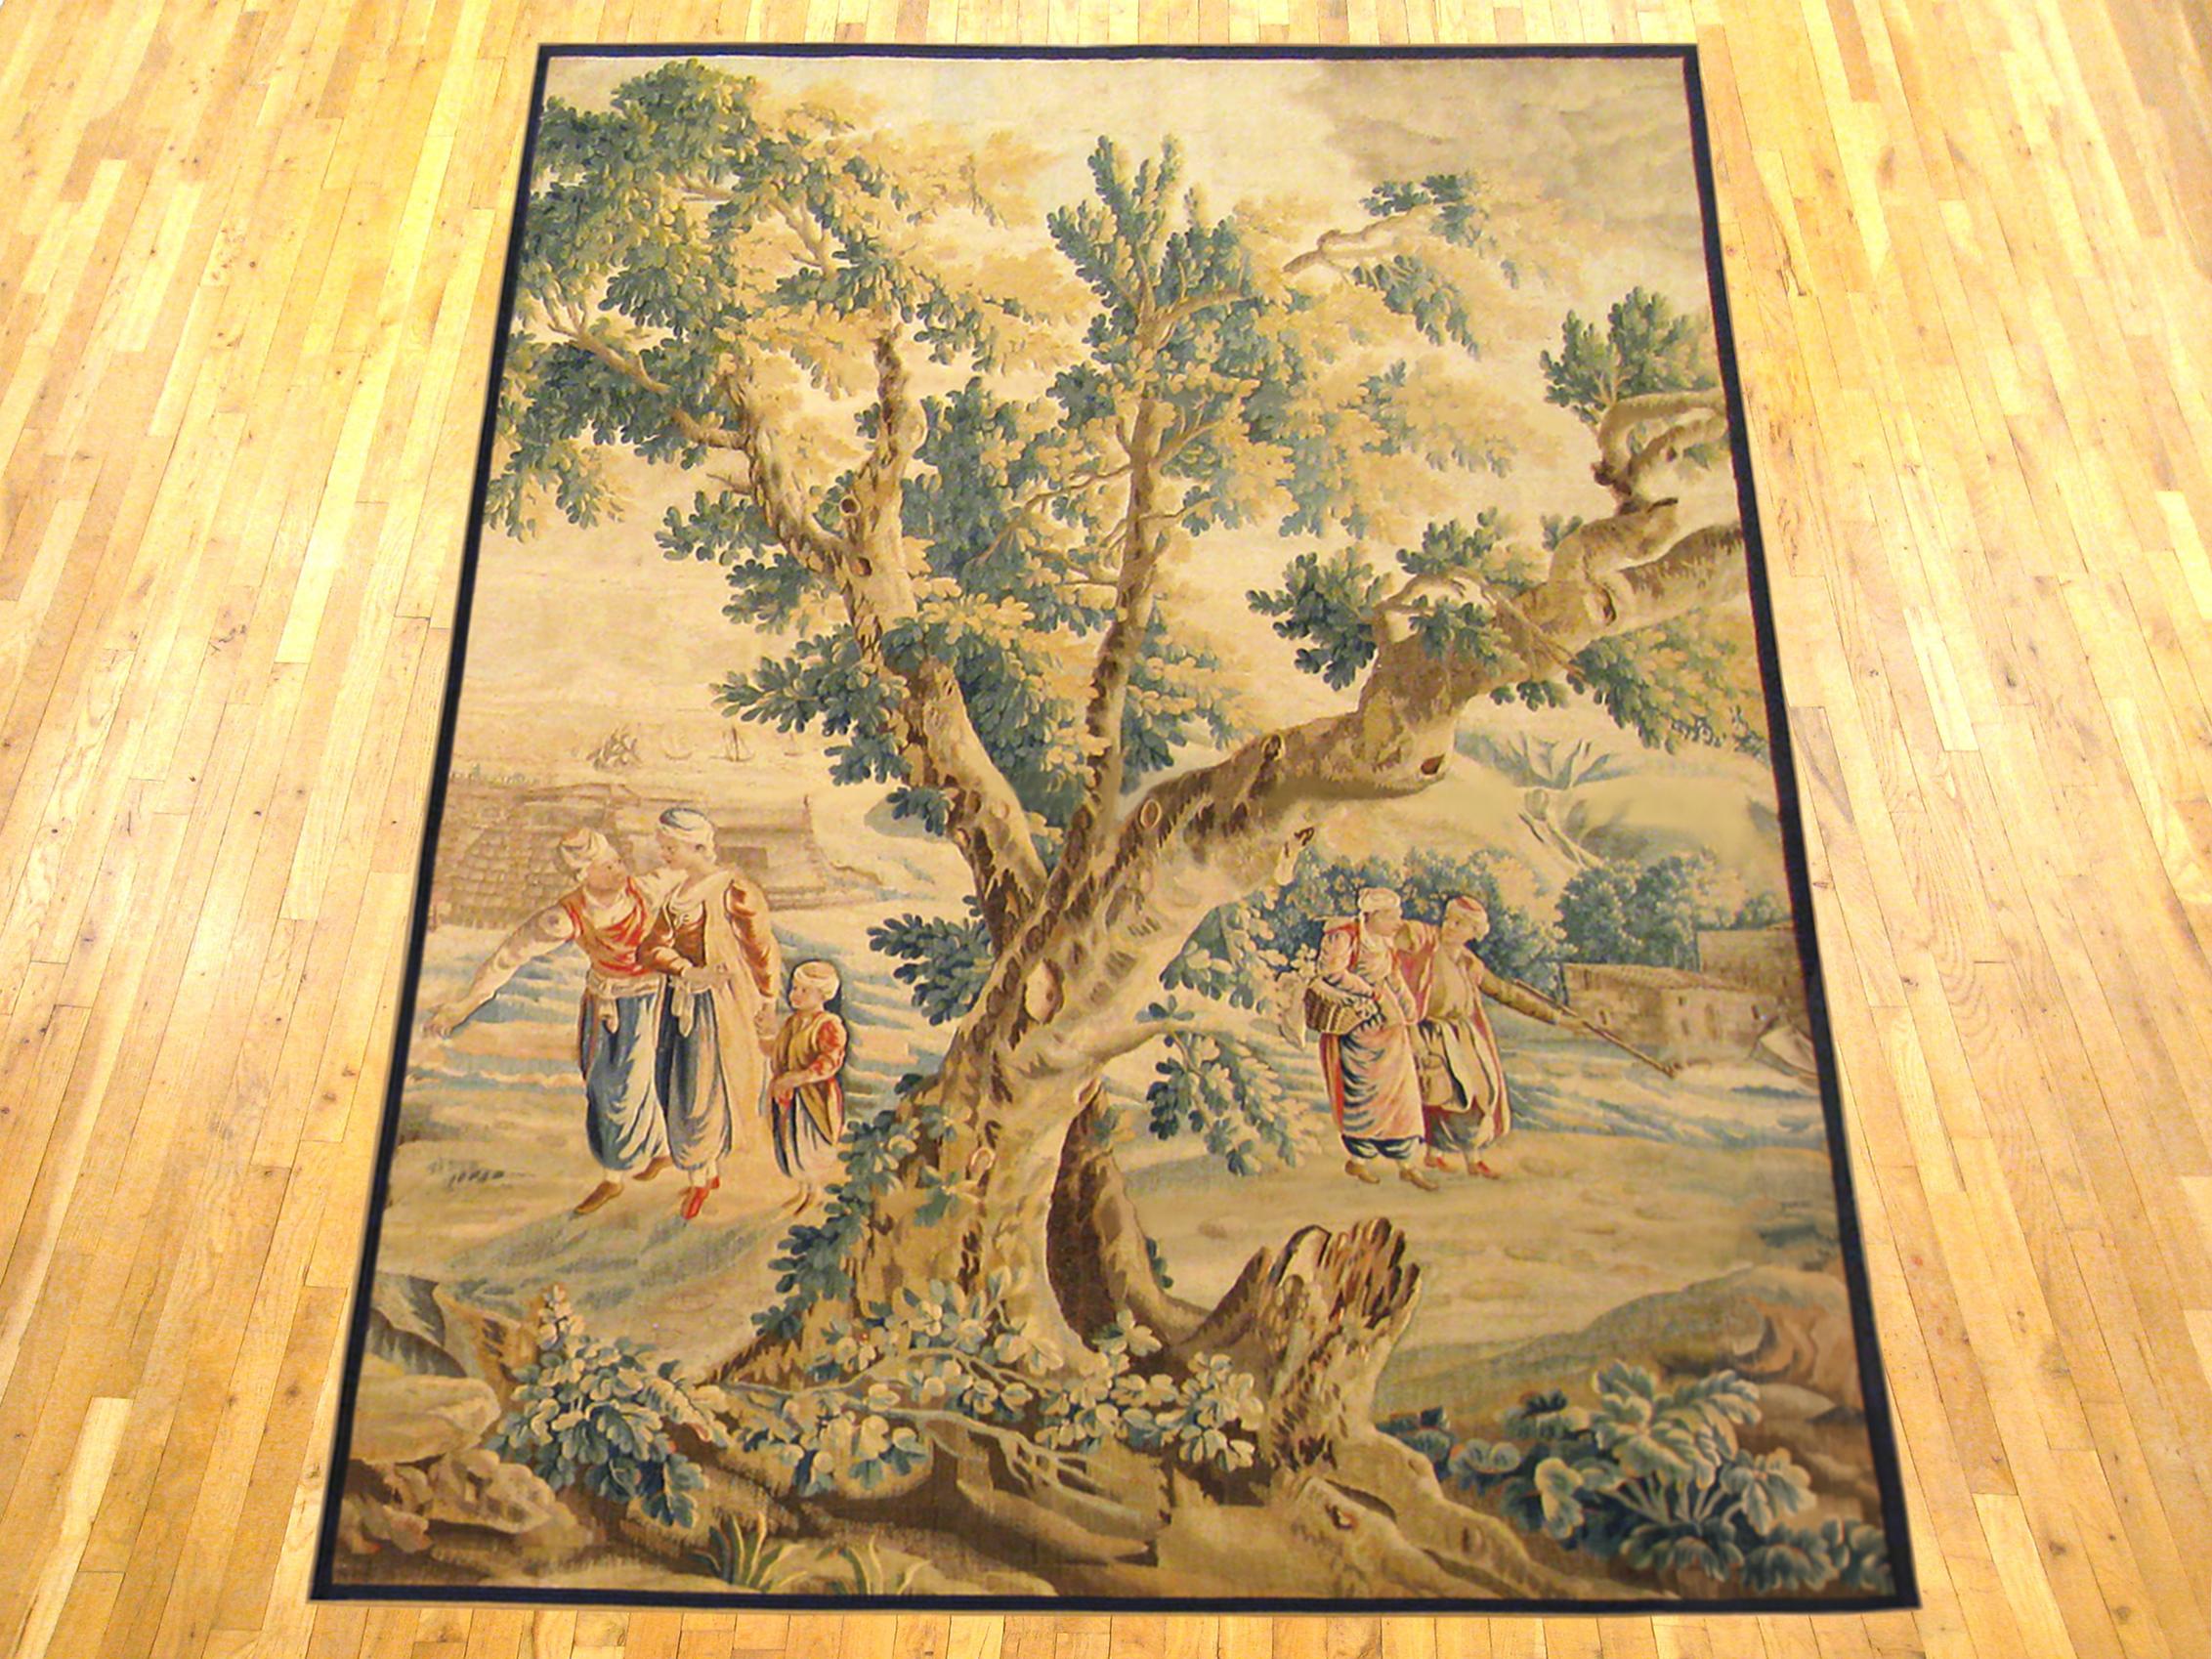 A French Aubusson rustic tapestry from the late 17th century, depicting several villagers on either side of a large tree in the right foreground, watching the cargo being unloaded from a large vessel docked by the verdant river bank at left.